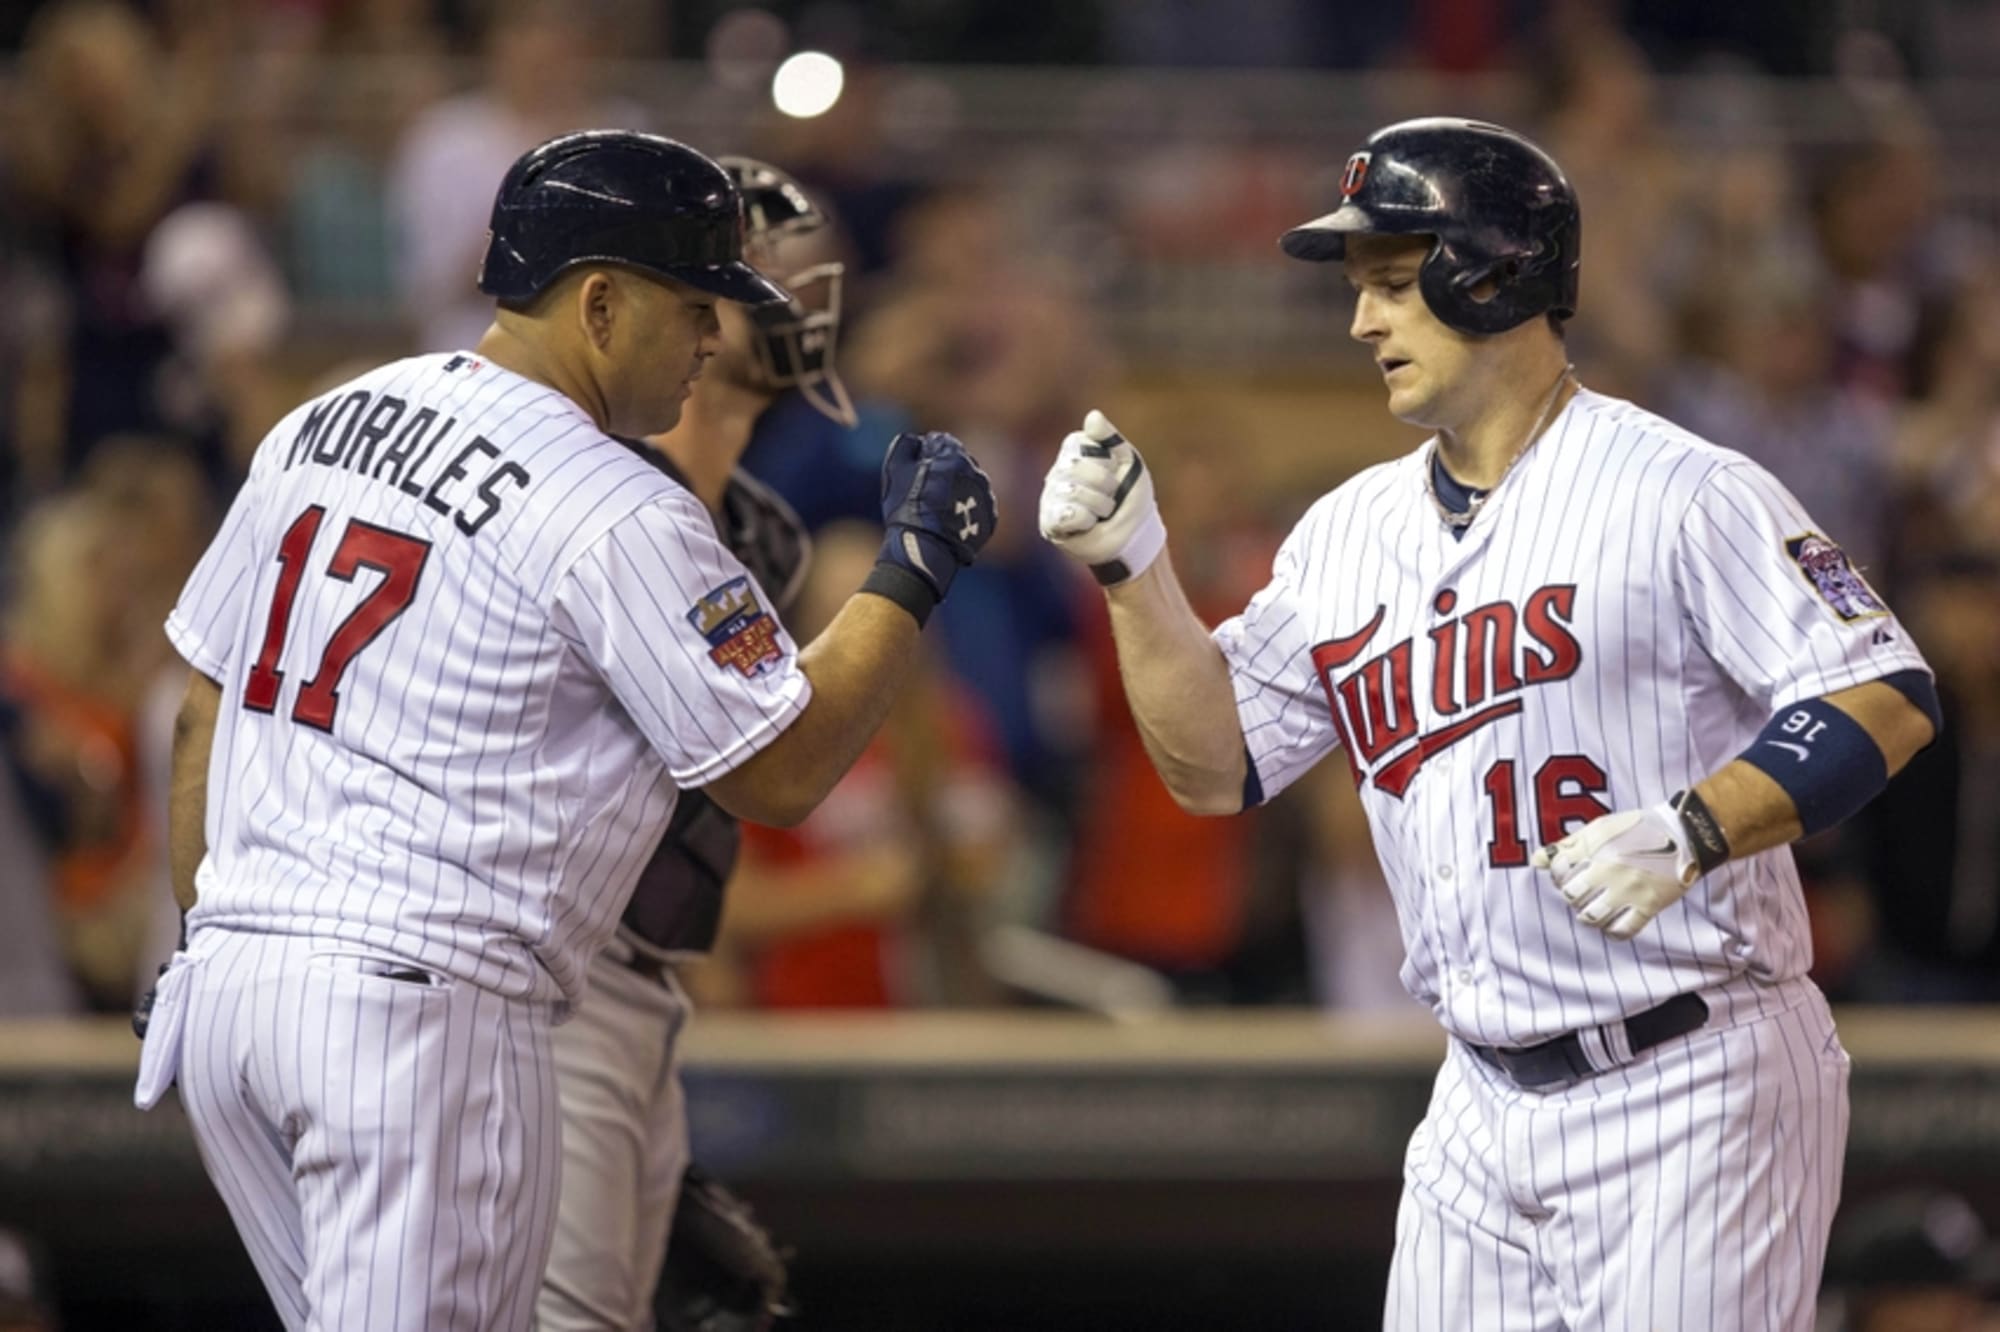 Minnesota Twins could trade Willingham, Correia after AllStar Game